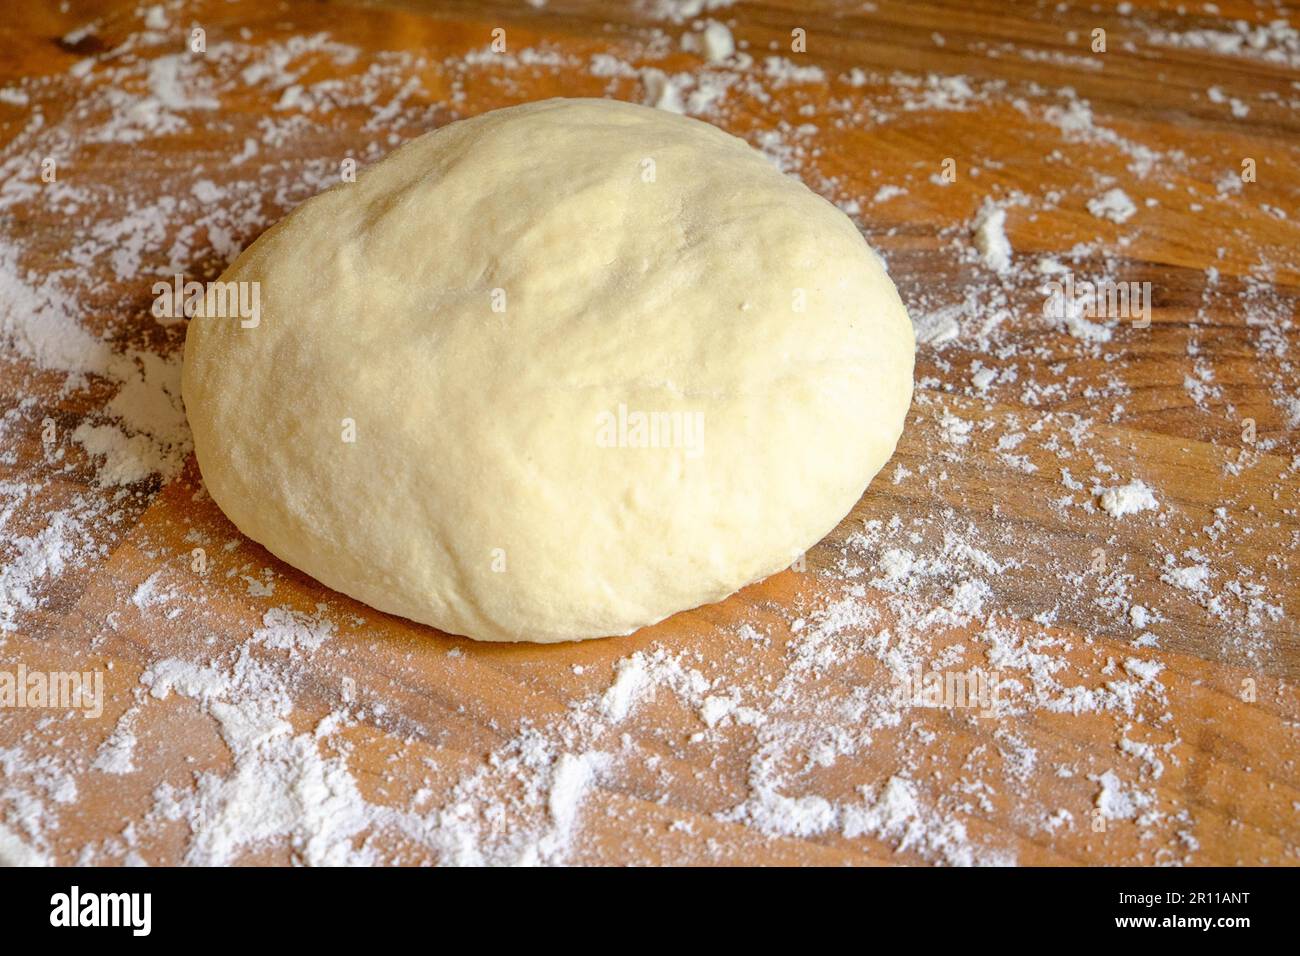 One scoop of homemade pizza dough, ready to roll out Stock Photo